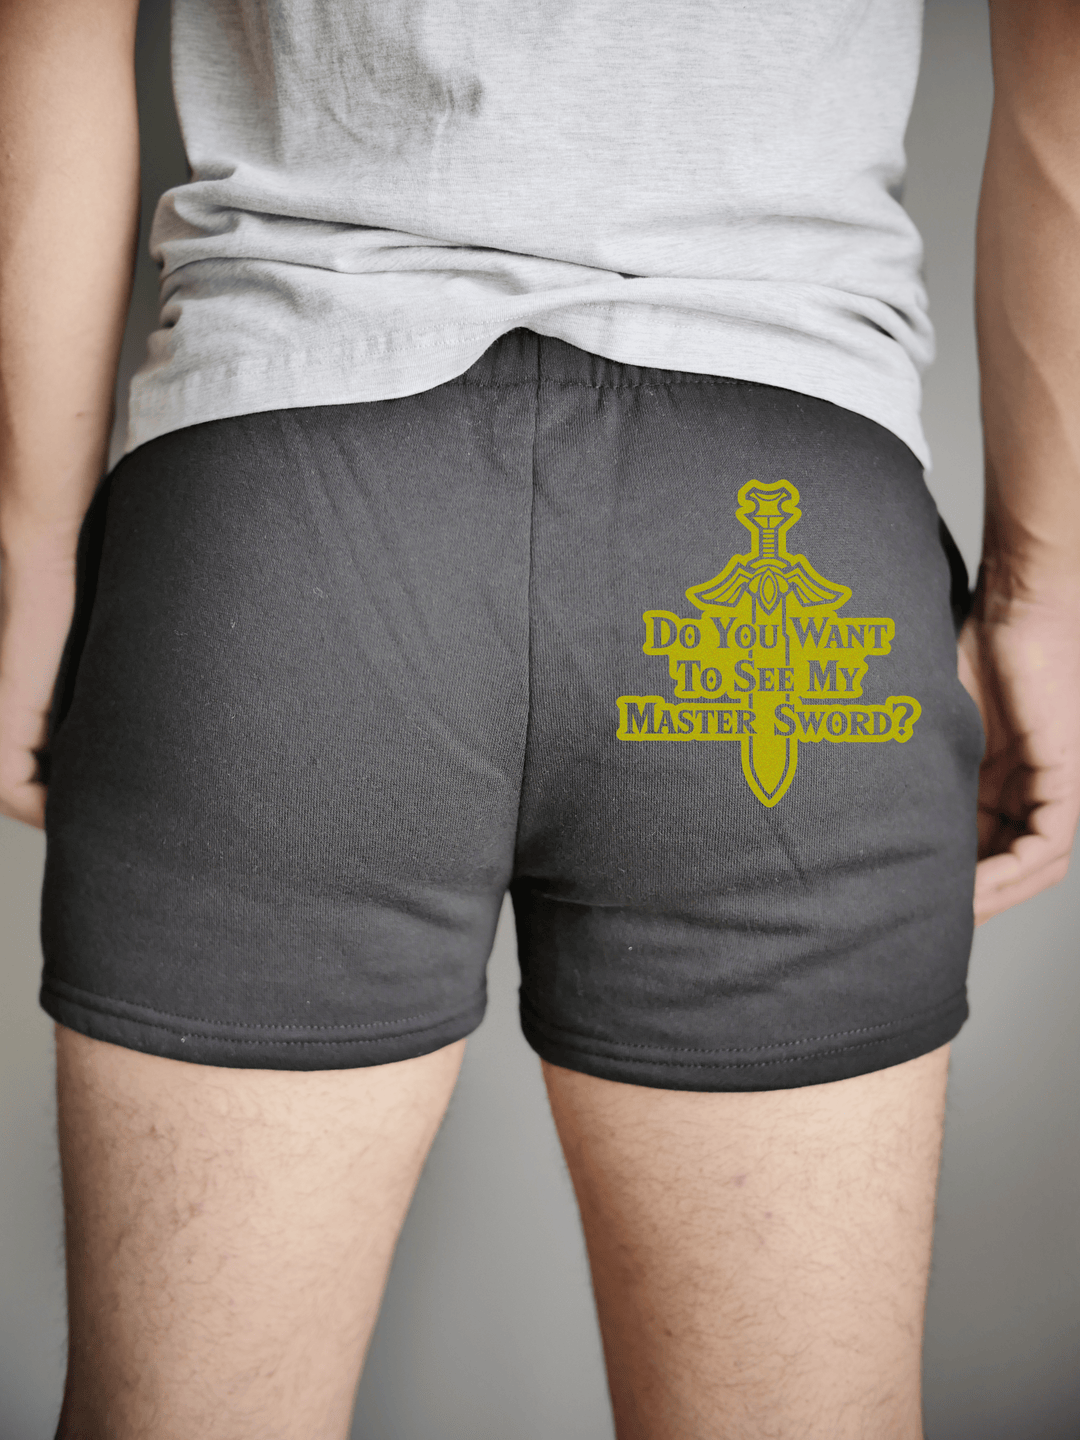 PixelThat Punderwear Shorts Black / S / Back Want to See My Master Sword? Men's Gym Shorts